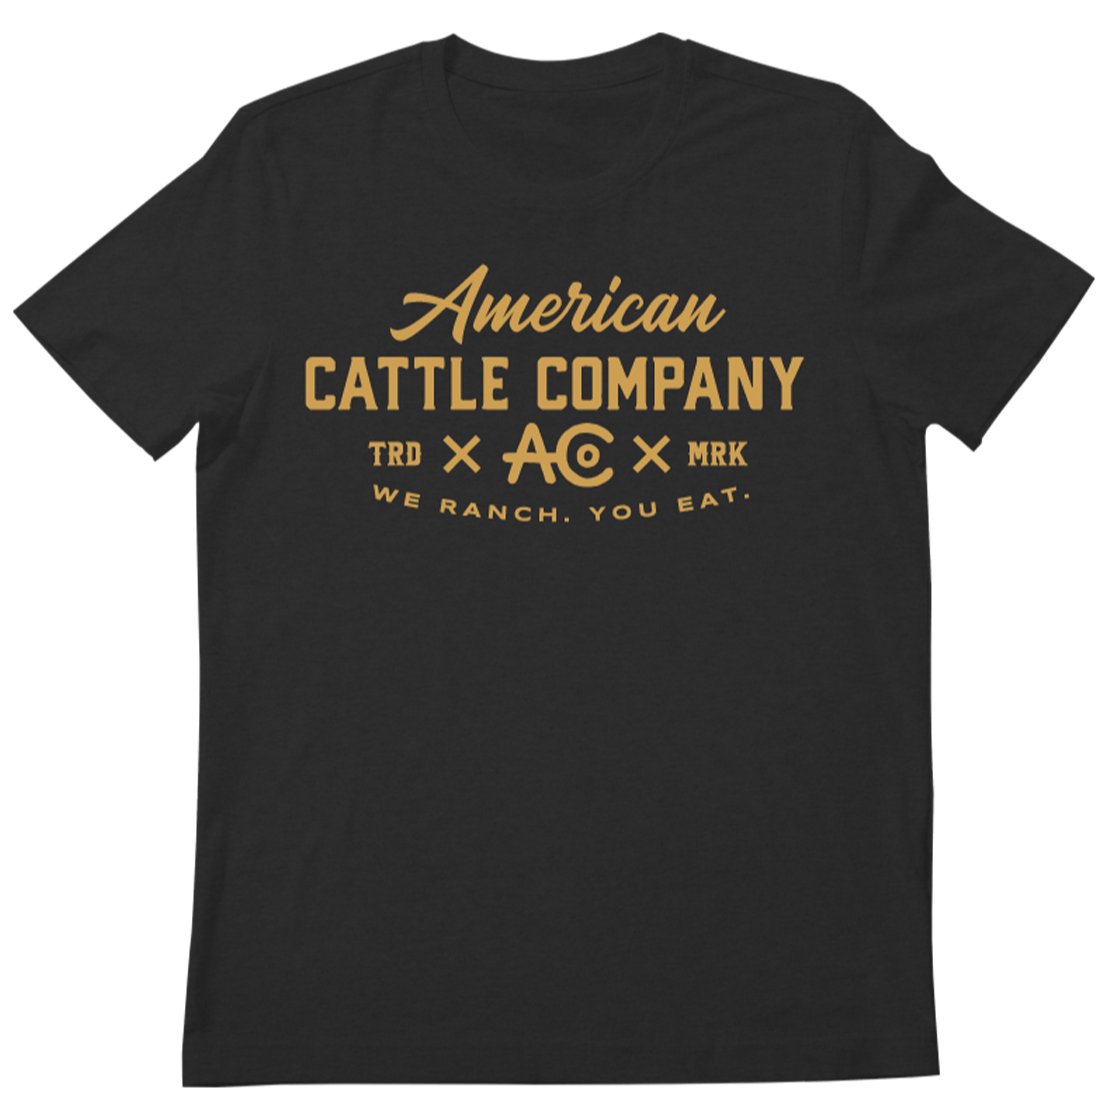 Rural Cloth Shirts We Ranch You Eat Tee-Heather Charcoal